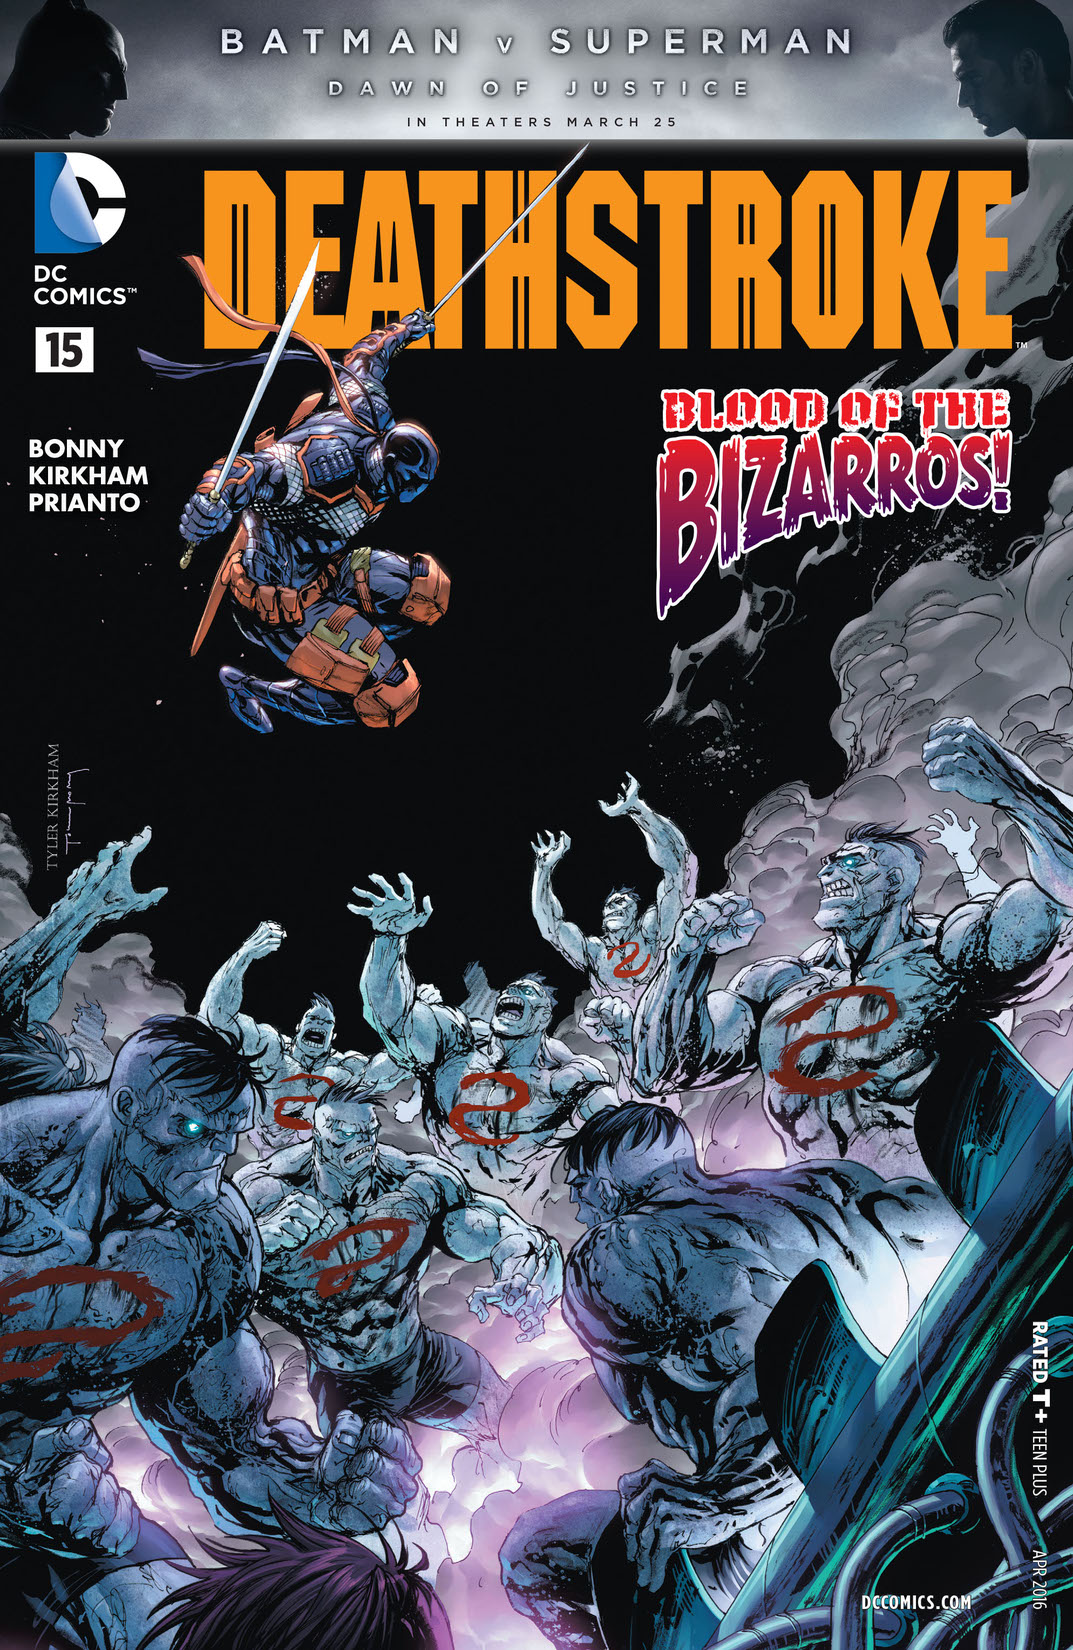 Deathstroke (2014-) #15 preview images